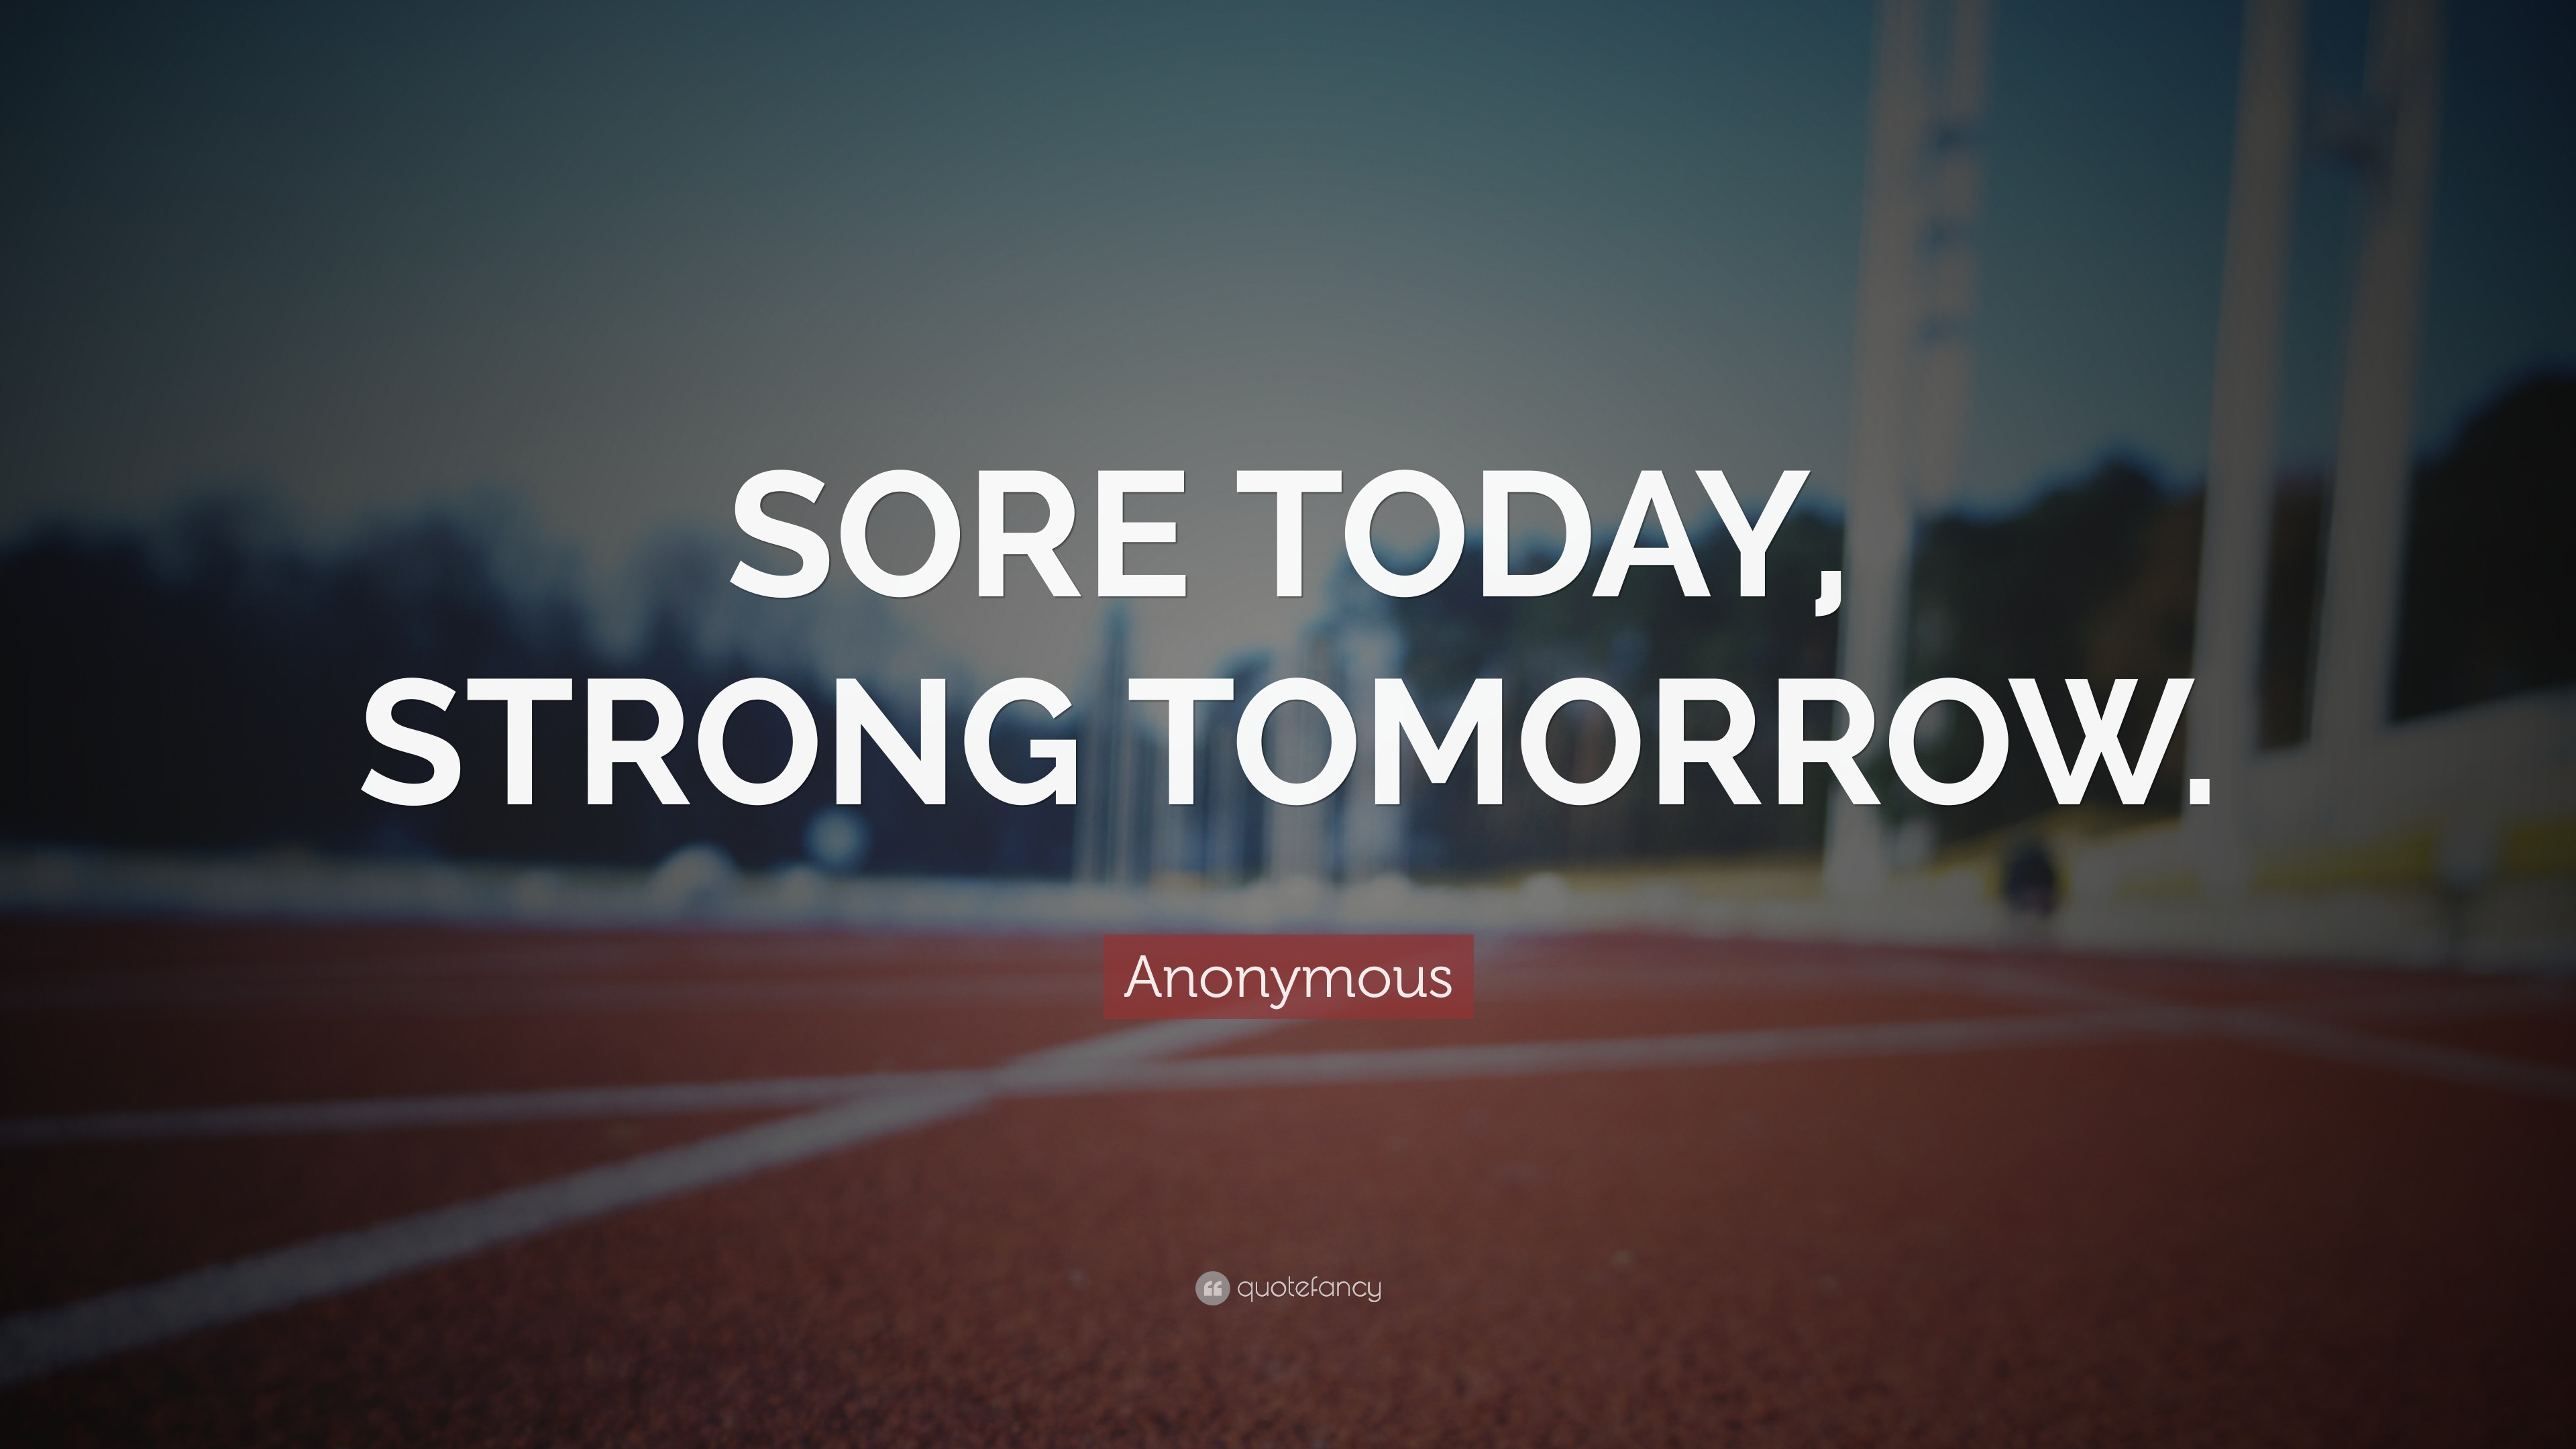 Sore today strong tomorrow by Naxart Studio